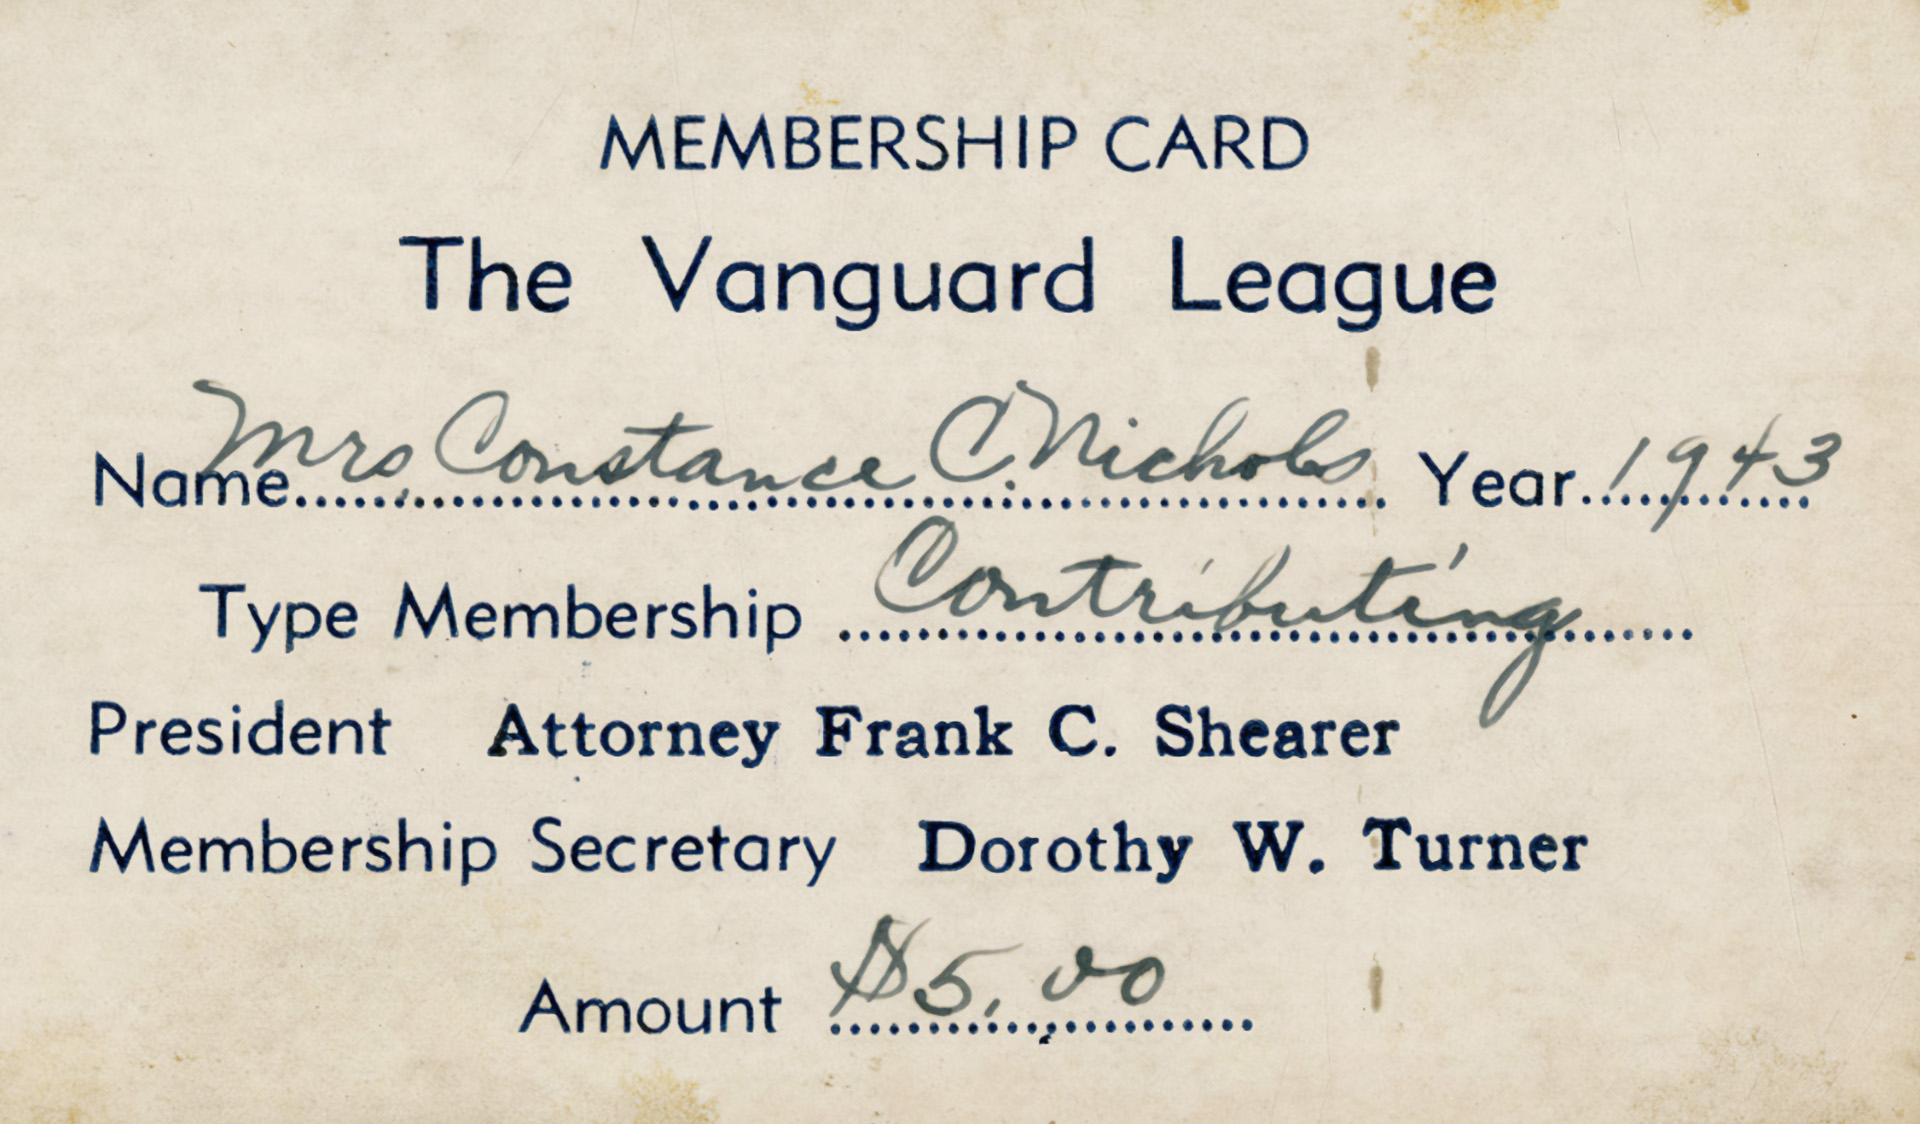 Membership card for Mrs. Constance C. Nichols in the Vanguard League for the year 1943.The Vanguard League was dedicated to civil rights in the Columbus, OH area. As a contributing member her annual dues were $5.00. Nichols was a founding member of the League, which formed during a meeting at her home in 1940.